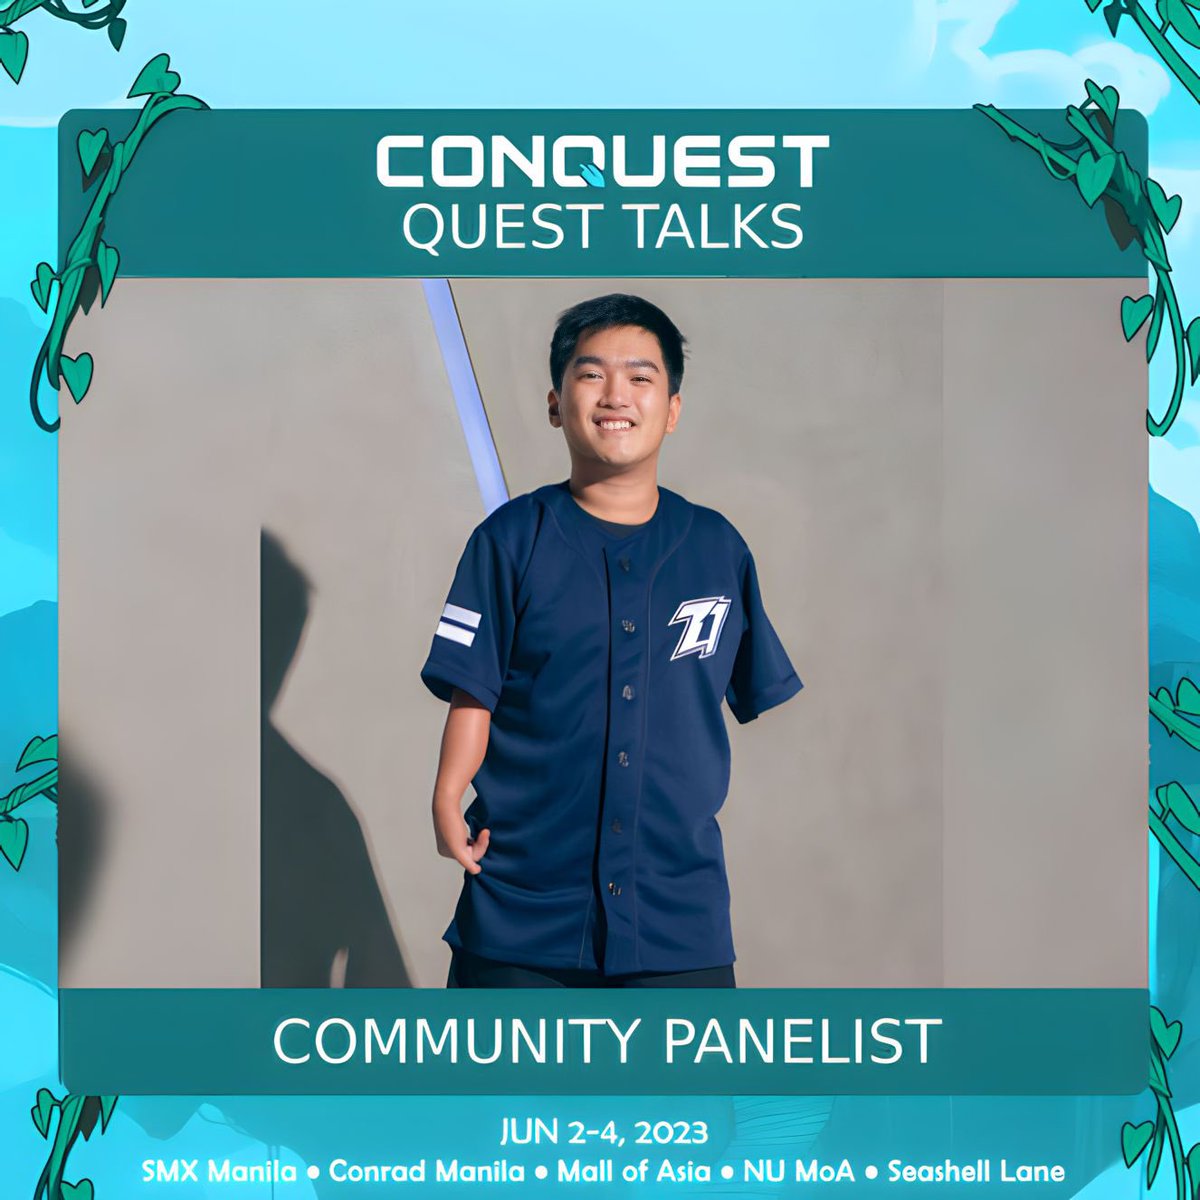 See you in the skies, fam! 🫶

@CONQuestPHL 
#CONQuest2023